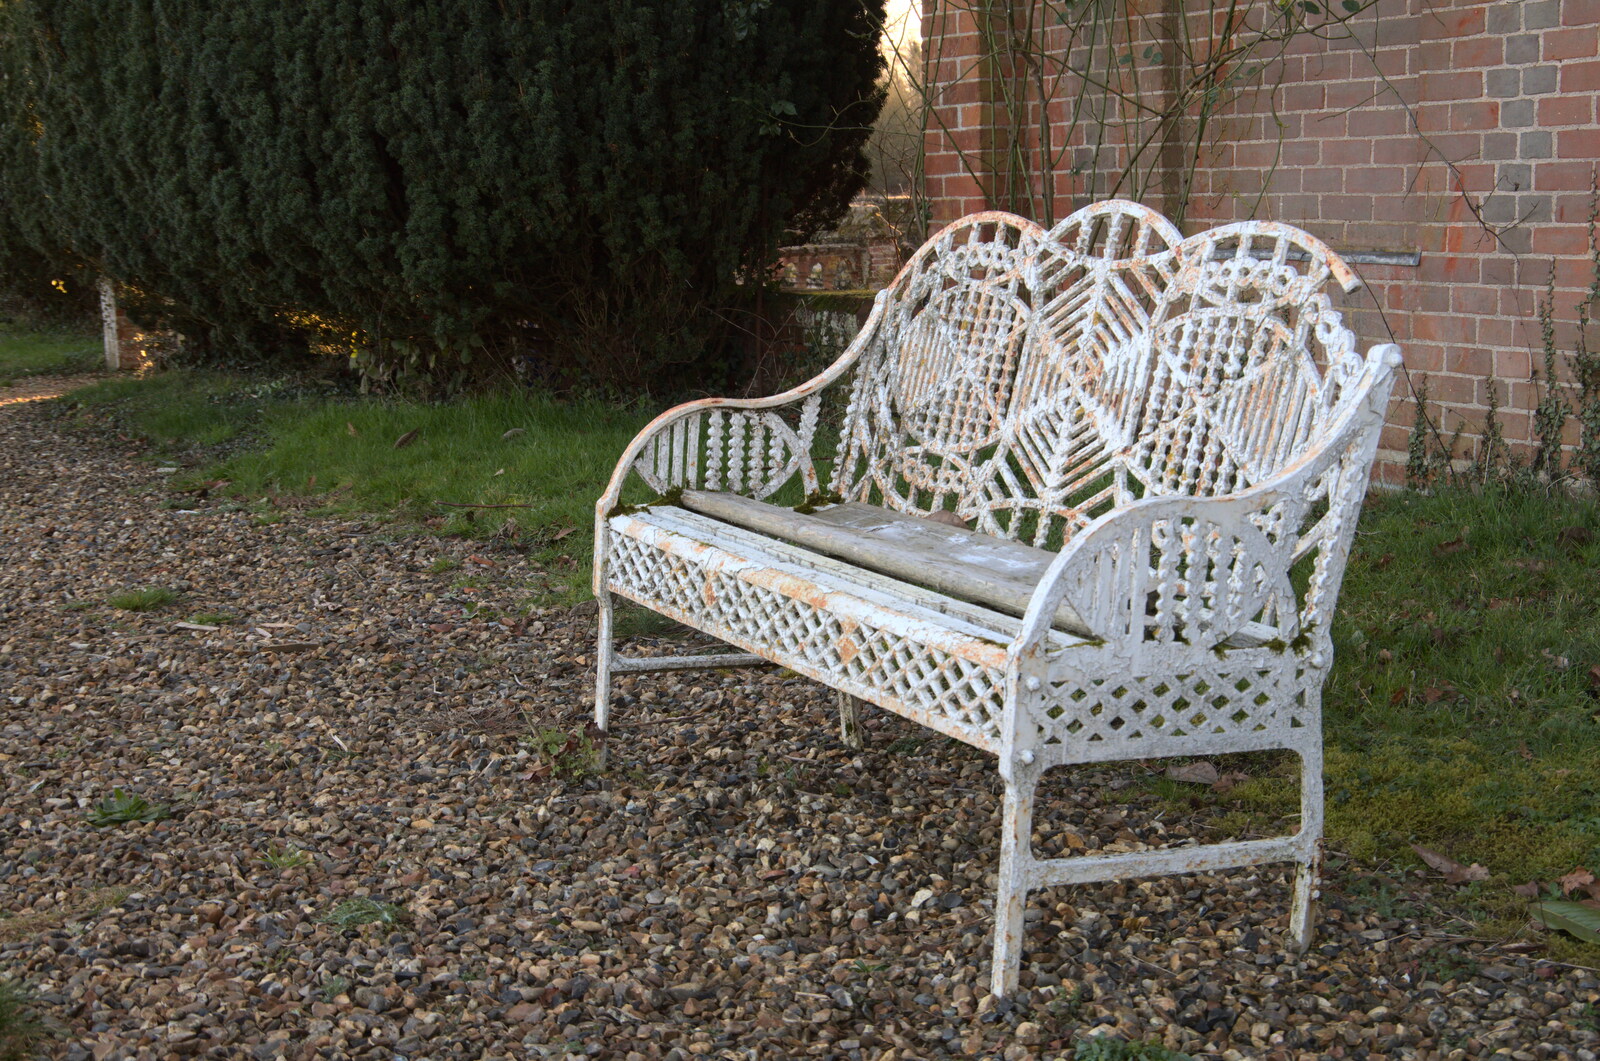 A wrought-iron bench from Snowdrops at Talconeston Hall, Tacolneston, Norfolk - 7th February 2020